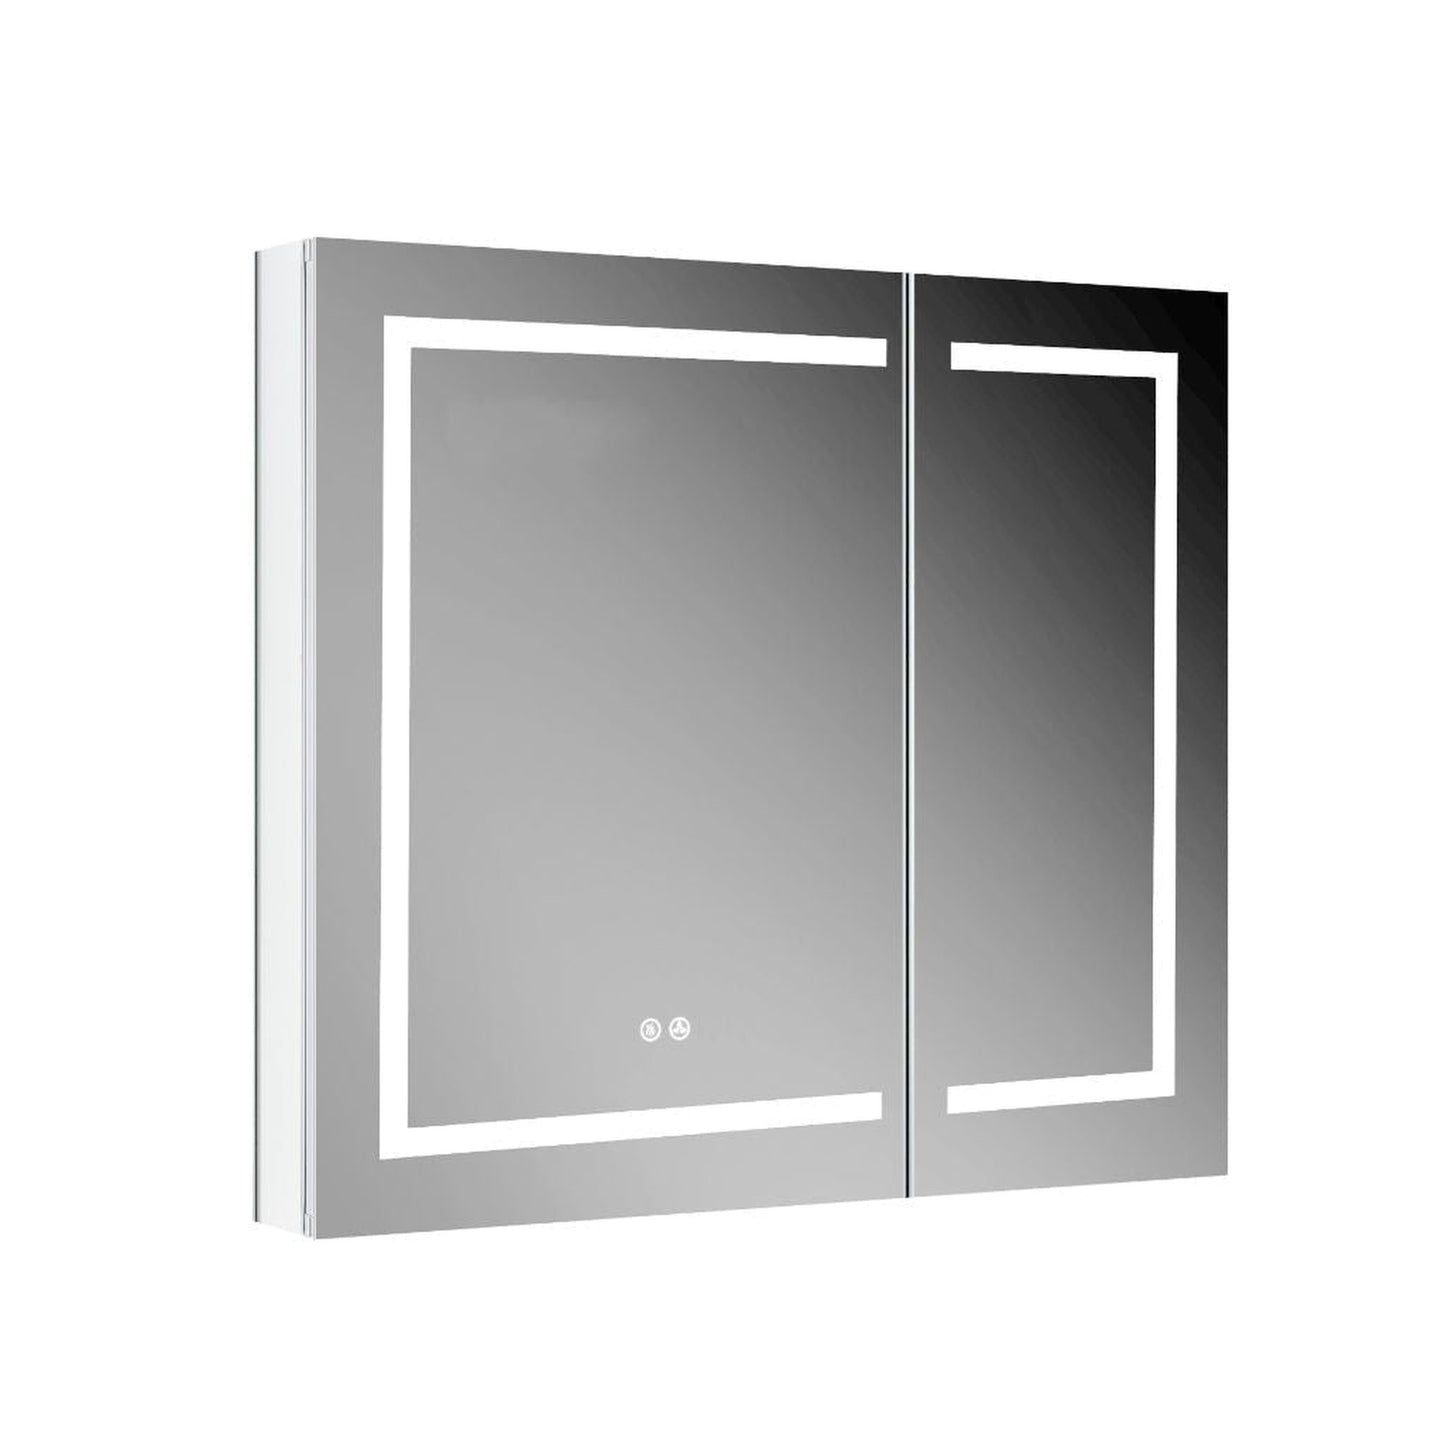 Blossom Vega 36" x 32" Recessed or Surface Mount 2-Door LED Mirror Medicine Cabinet With 3 Adjustable Glass Shelves and Built-In Defogger